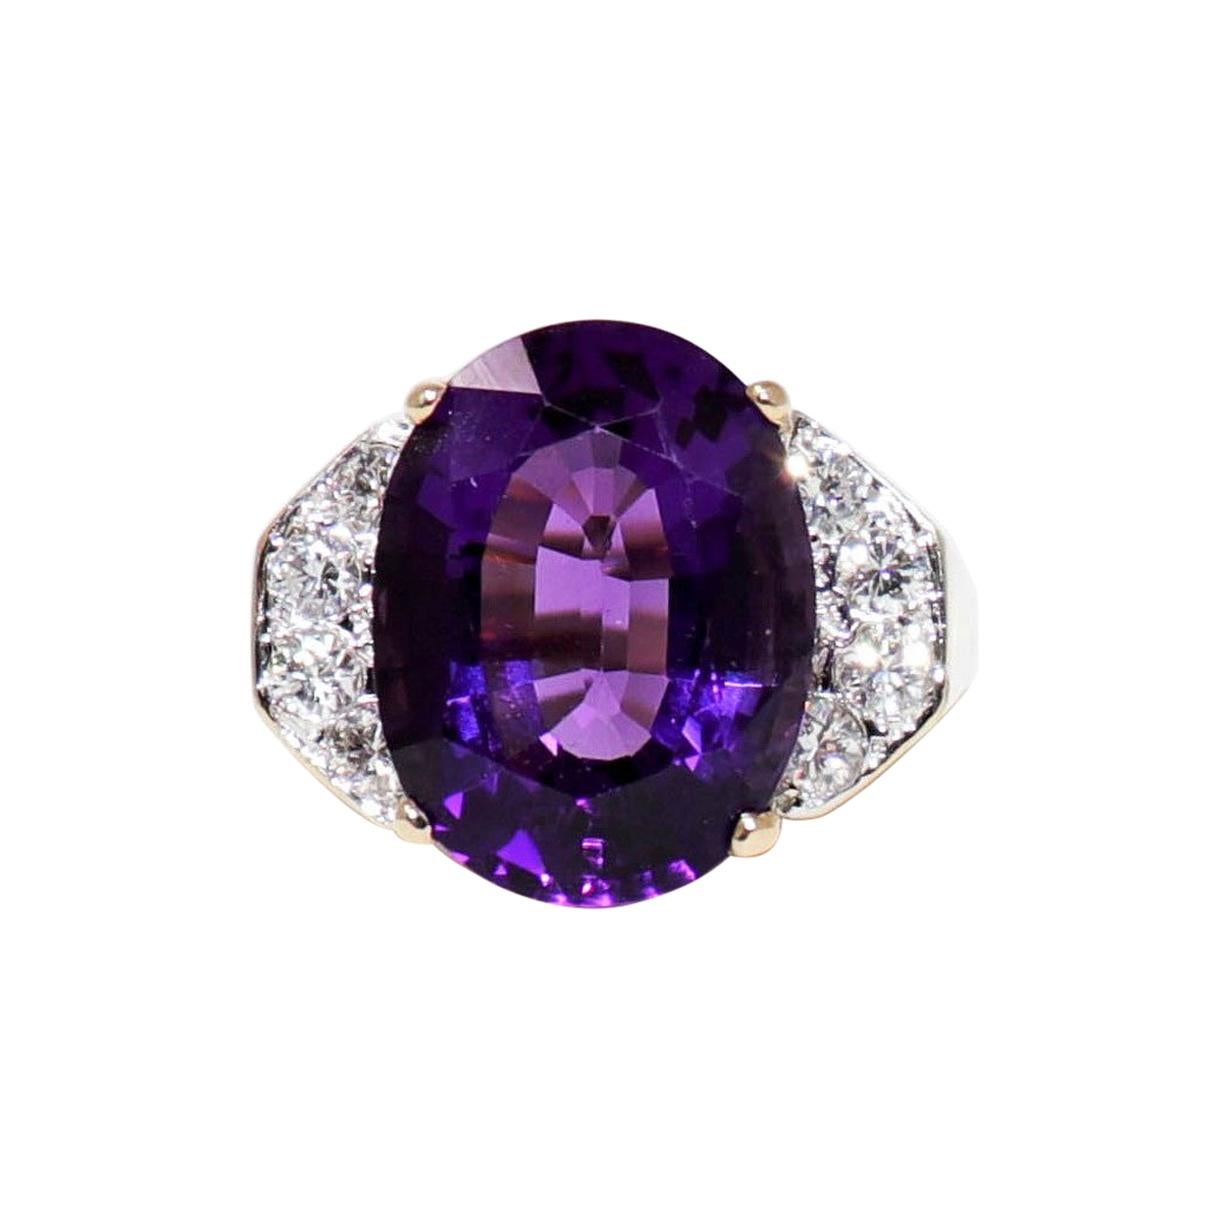 Oval Amethyst and Diamond Accent Cocktail Ring 14 Karat Gold 8.91 Carats Total For Sale